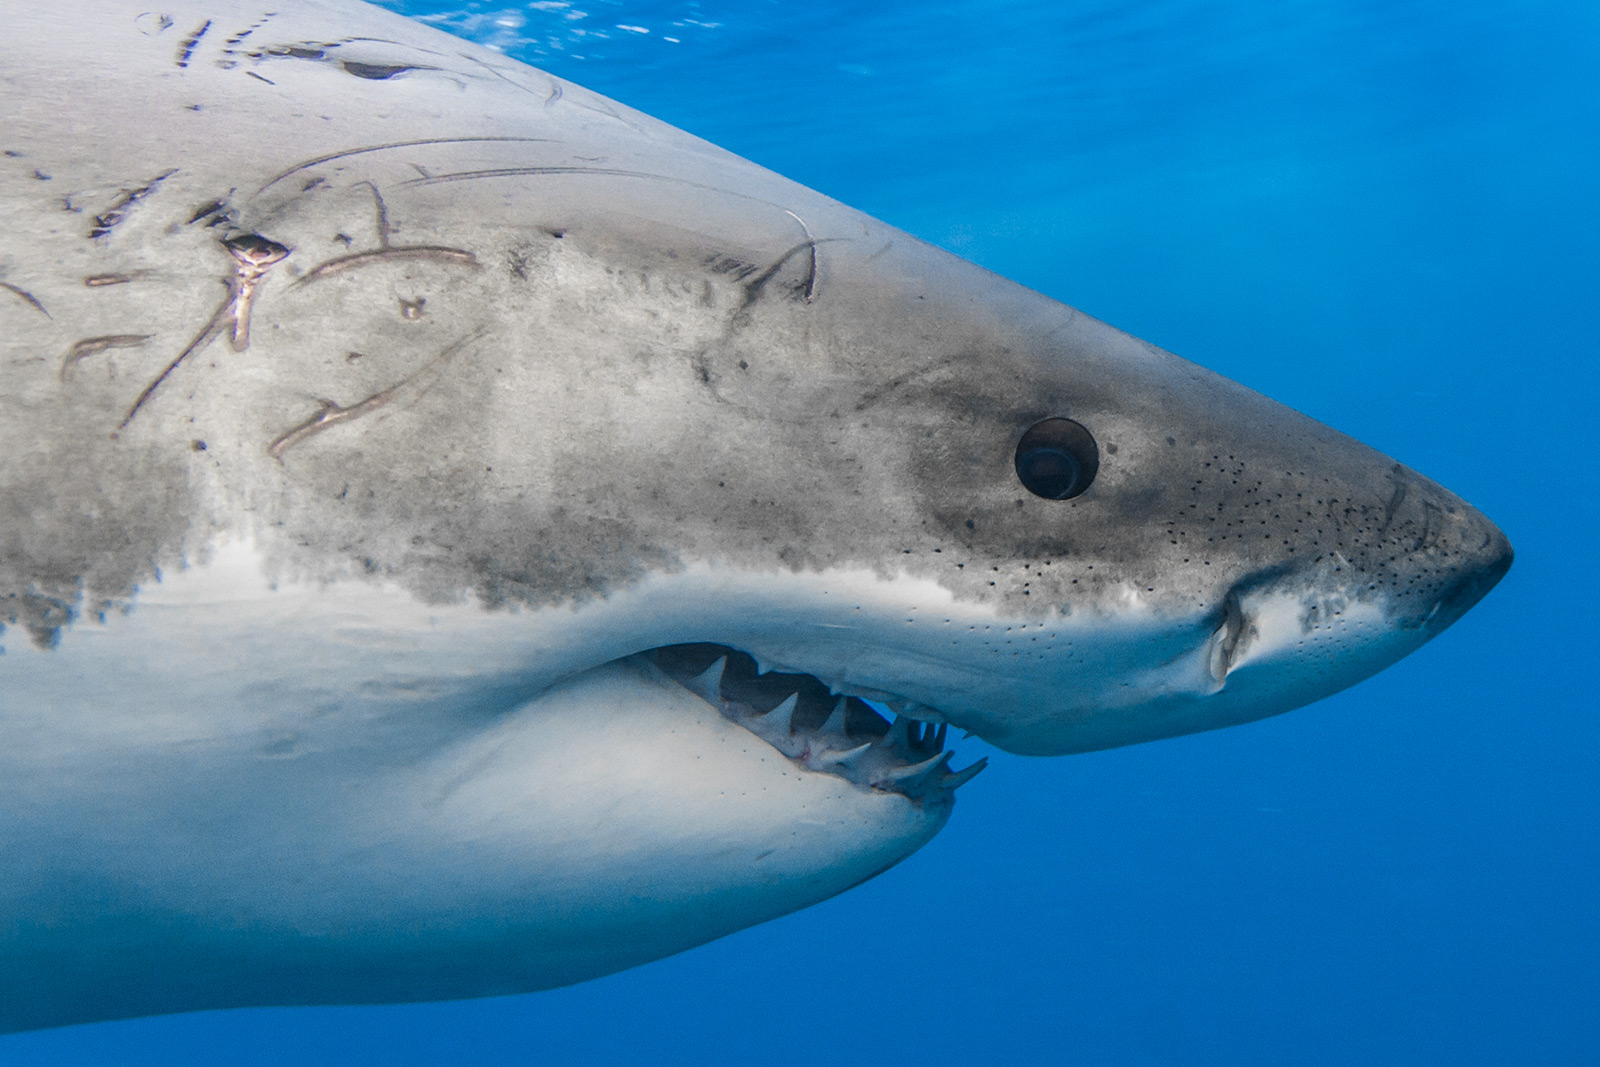 The head of a great white shark with scars